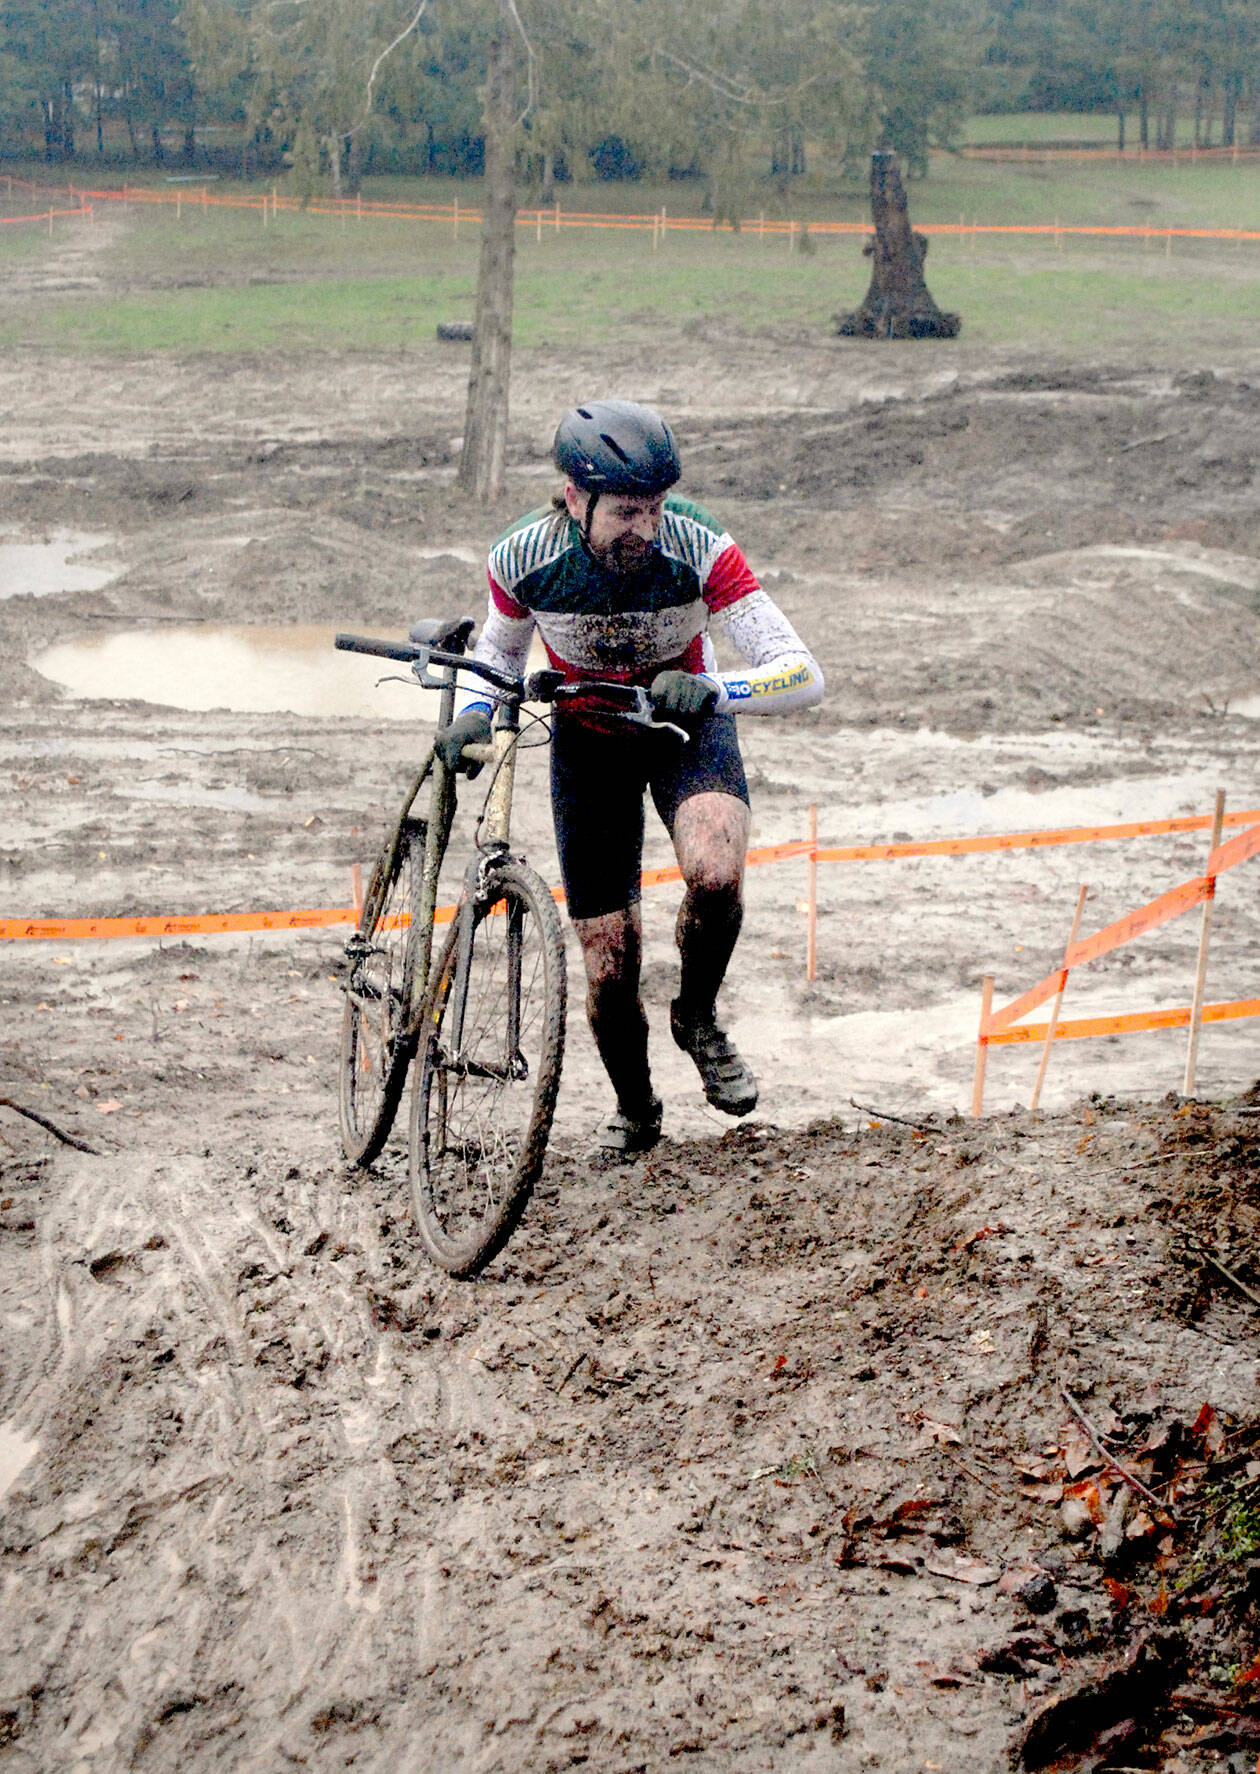 Bryan Smith of Seattle pushes his bicycle up a steep, muddy hill during Saturday’s PNW Extreme Cyclocross mens single-speed race at Extreme Sports Park in Port Angeles. (Keith Thorpe/Peninsula Daily News)